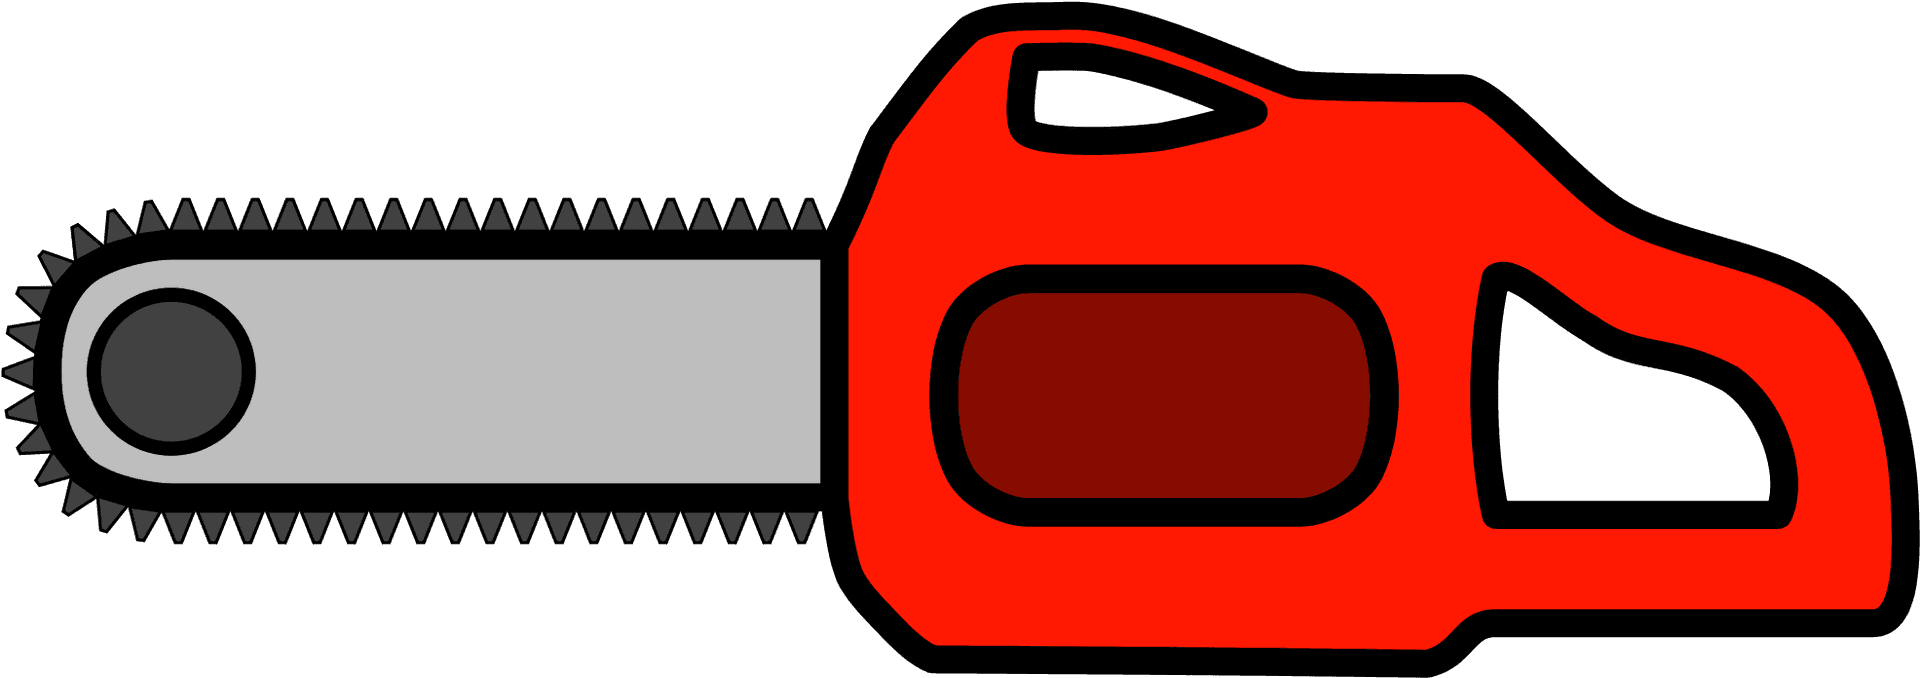 Redand Black Chainsaw Vector Illustration PNG